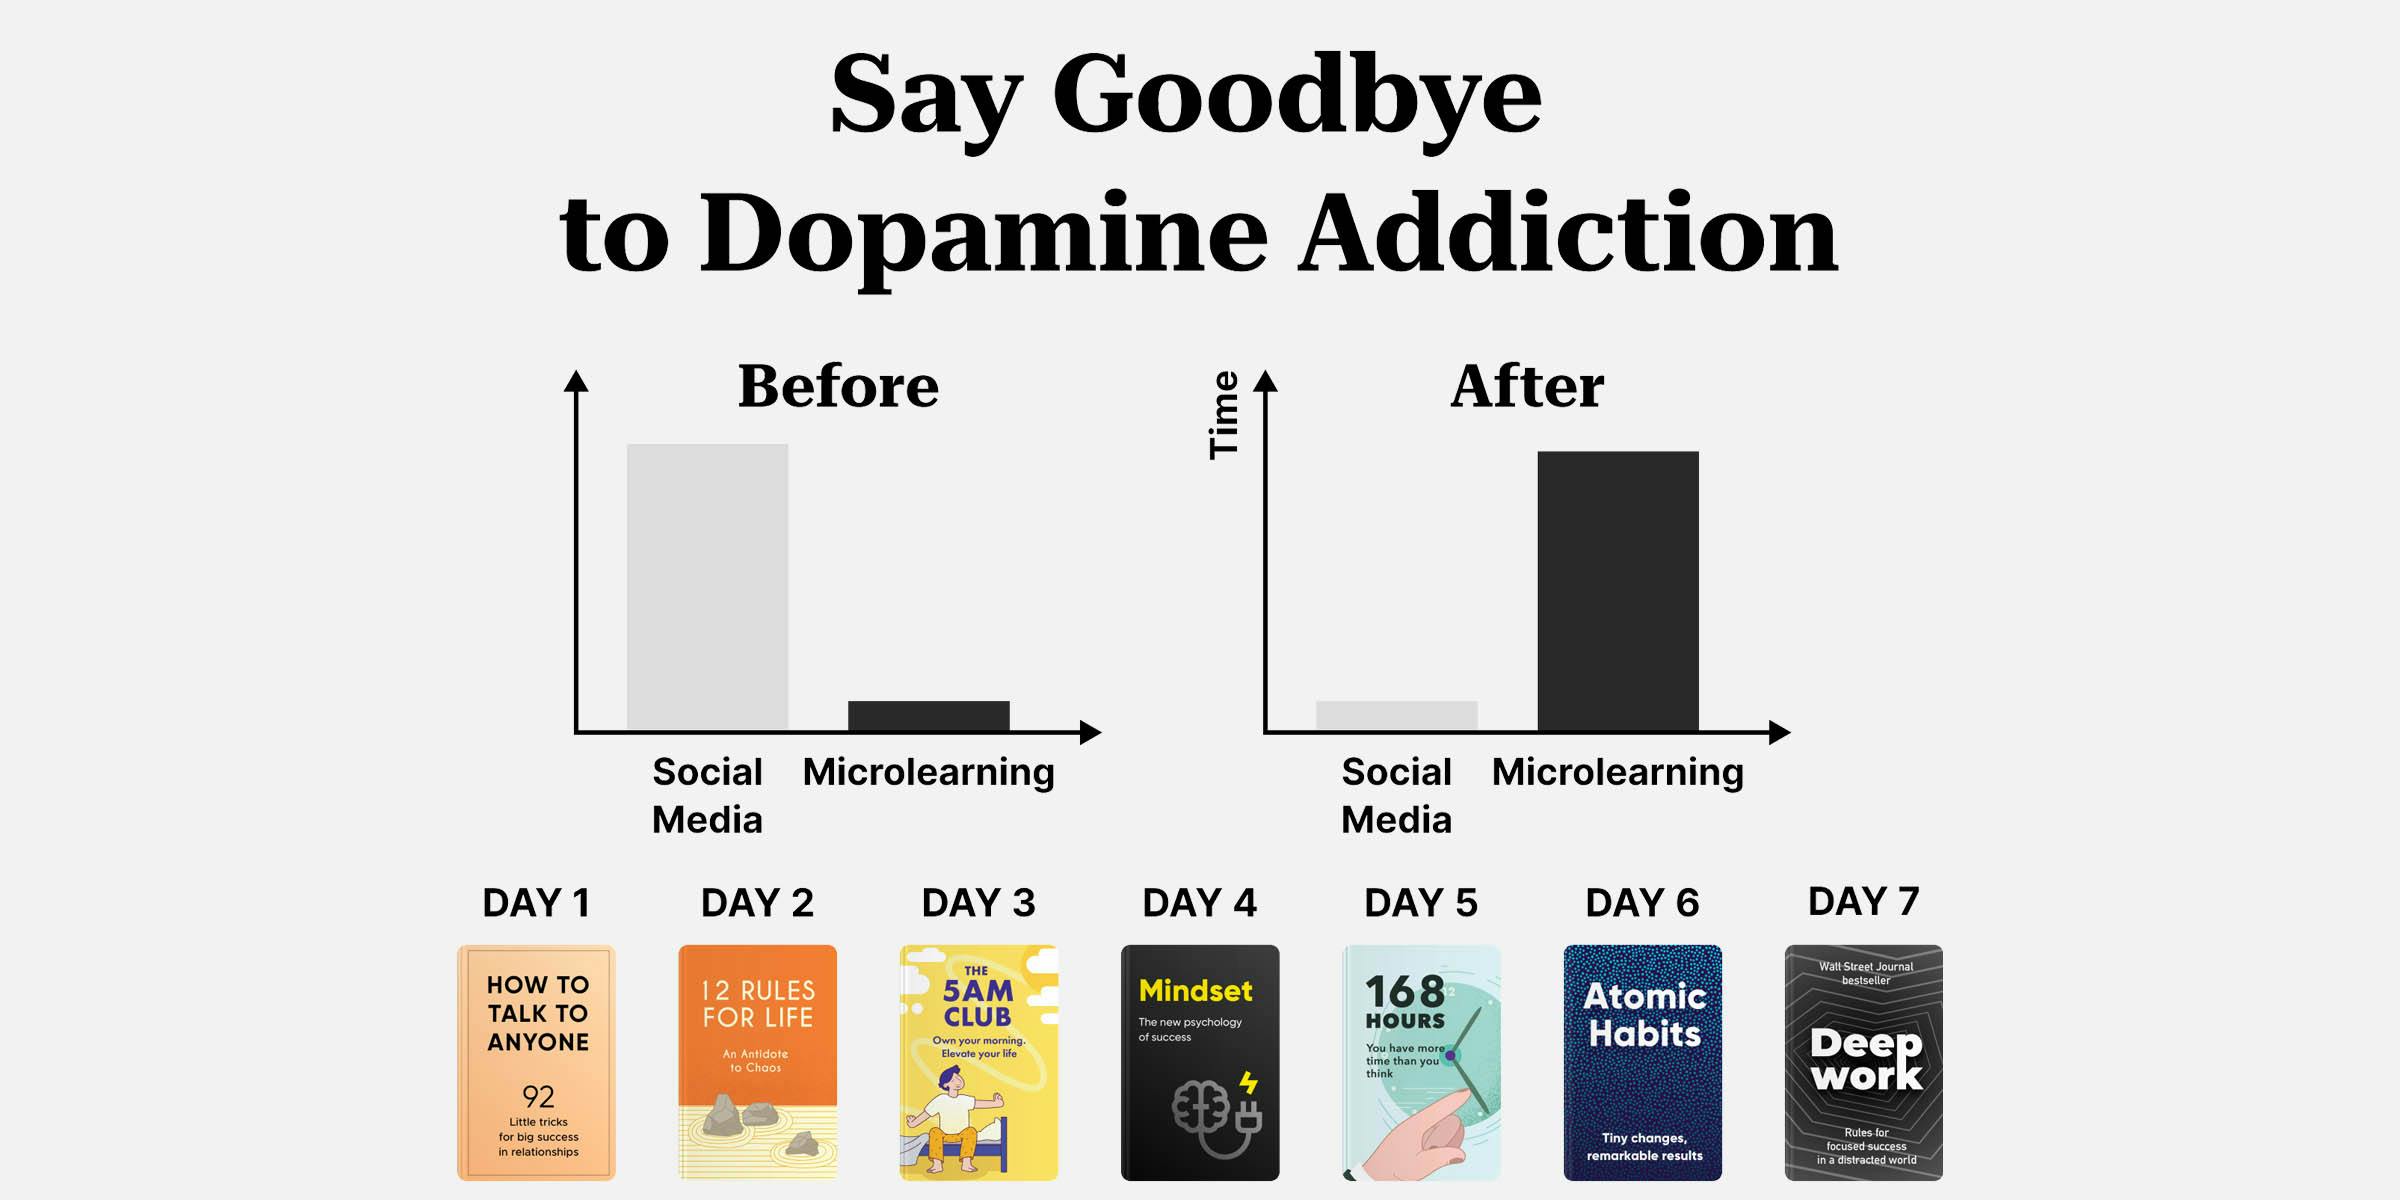 Addiction Rule Number 1: Stay Alive